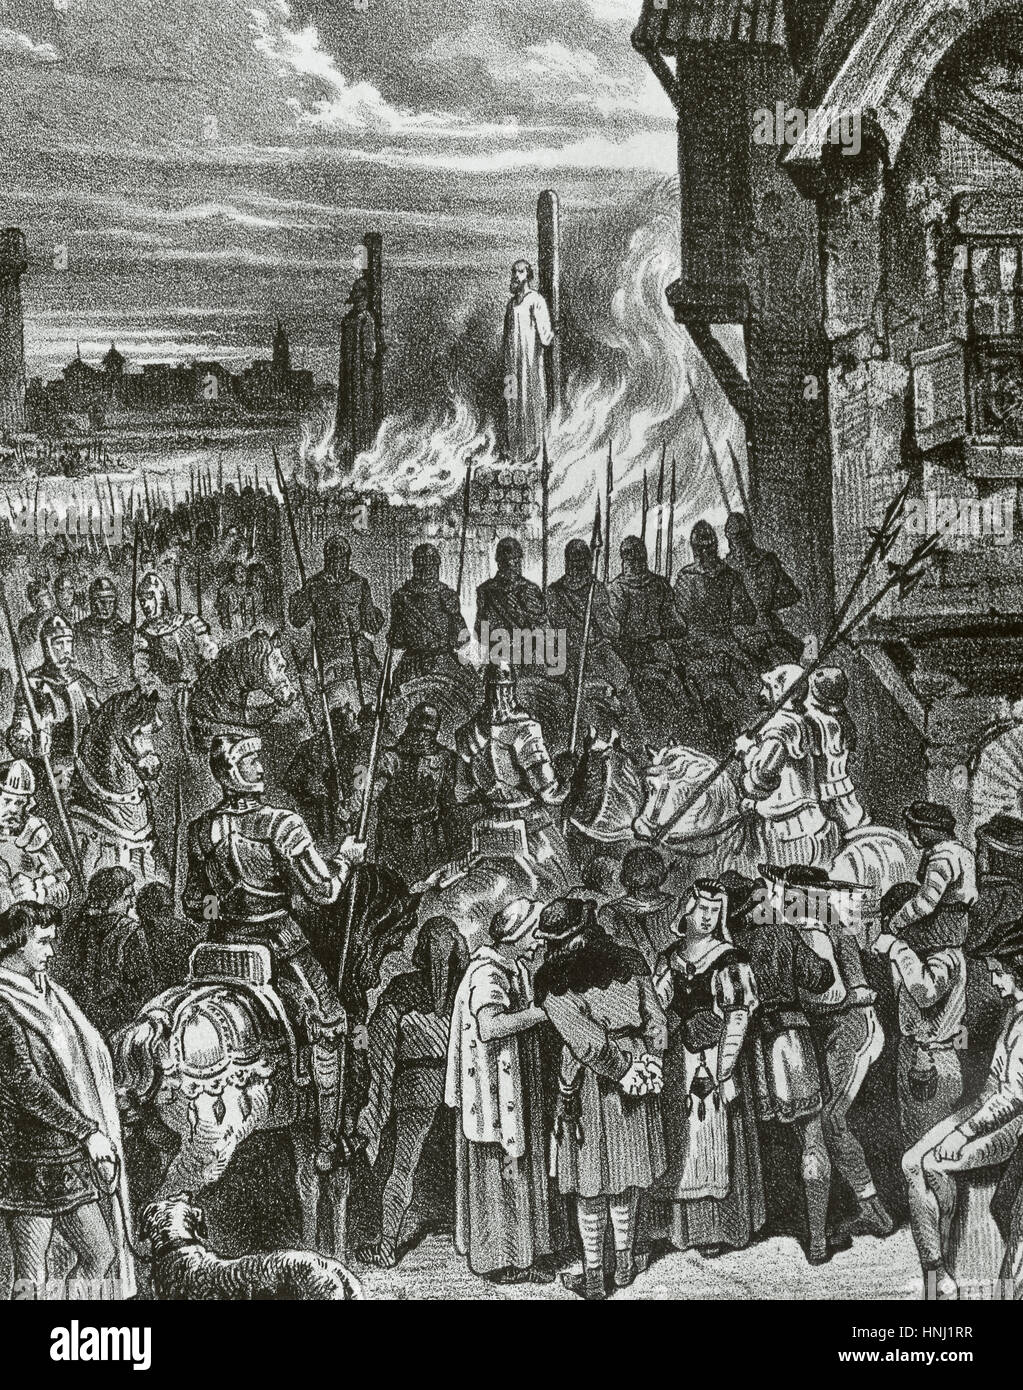 Burning of the Templars in France. Paris. Jacques de Molay (c.1240-1244-1314), Grand Master of the Order of the Temple, and Geoffroi de Charney, preceptor in Normandy, are burned at the stake accused of heresy by Pope Clement V March 18, 1314. Engraving. Stock Photo